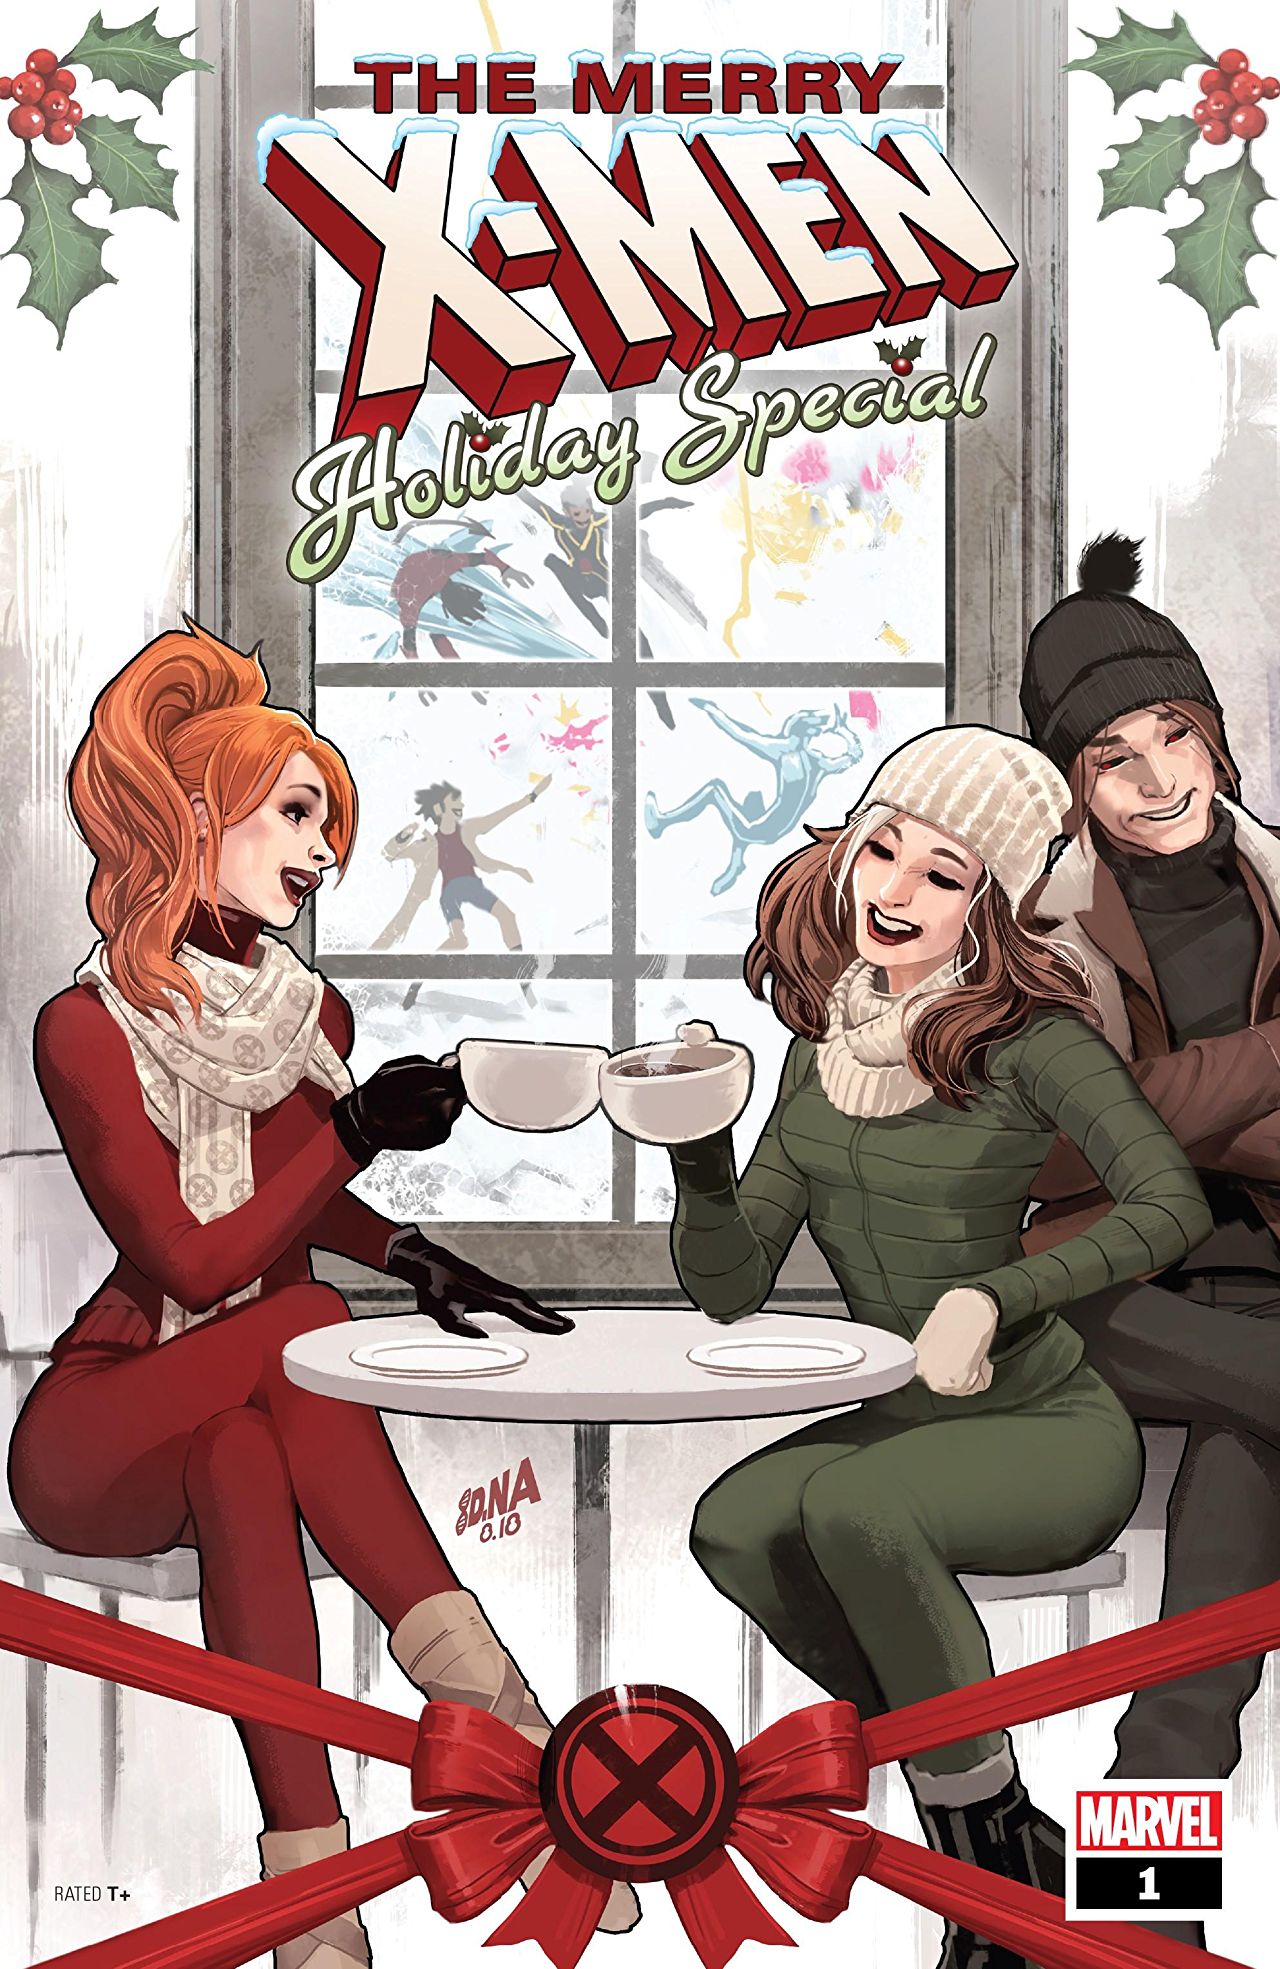 The Merry X-Men Holiday Special (2018) Review